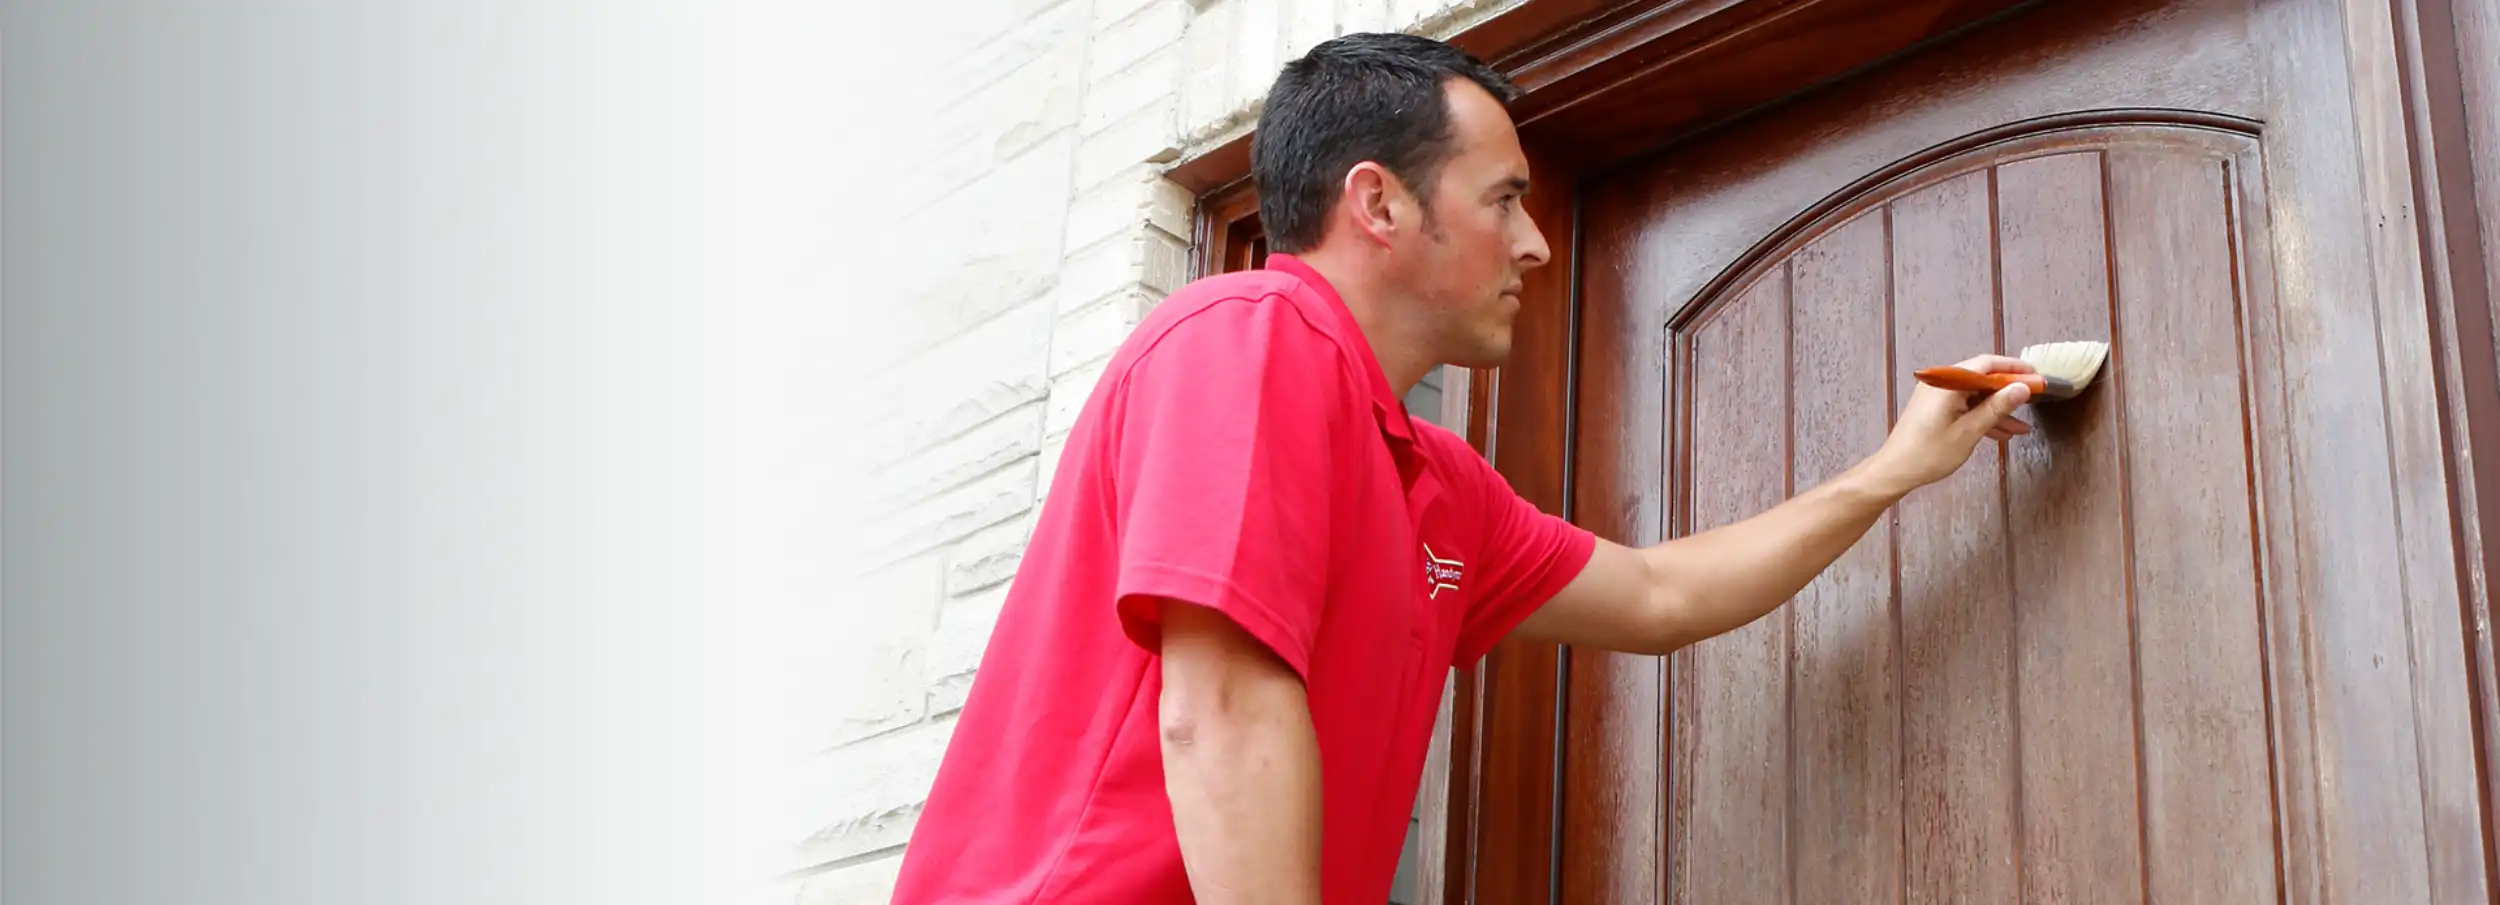 Mr. Handyman technician in red polo shirt staining a wood front door with a paintbrush.